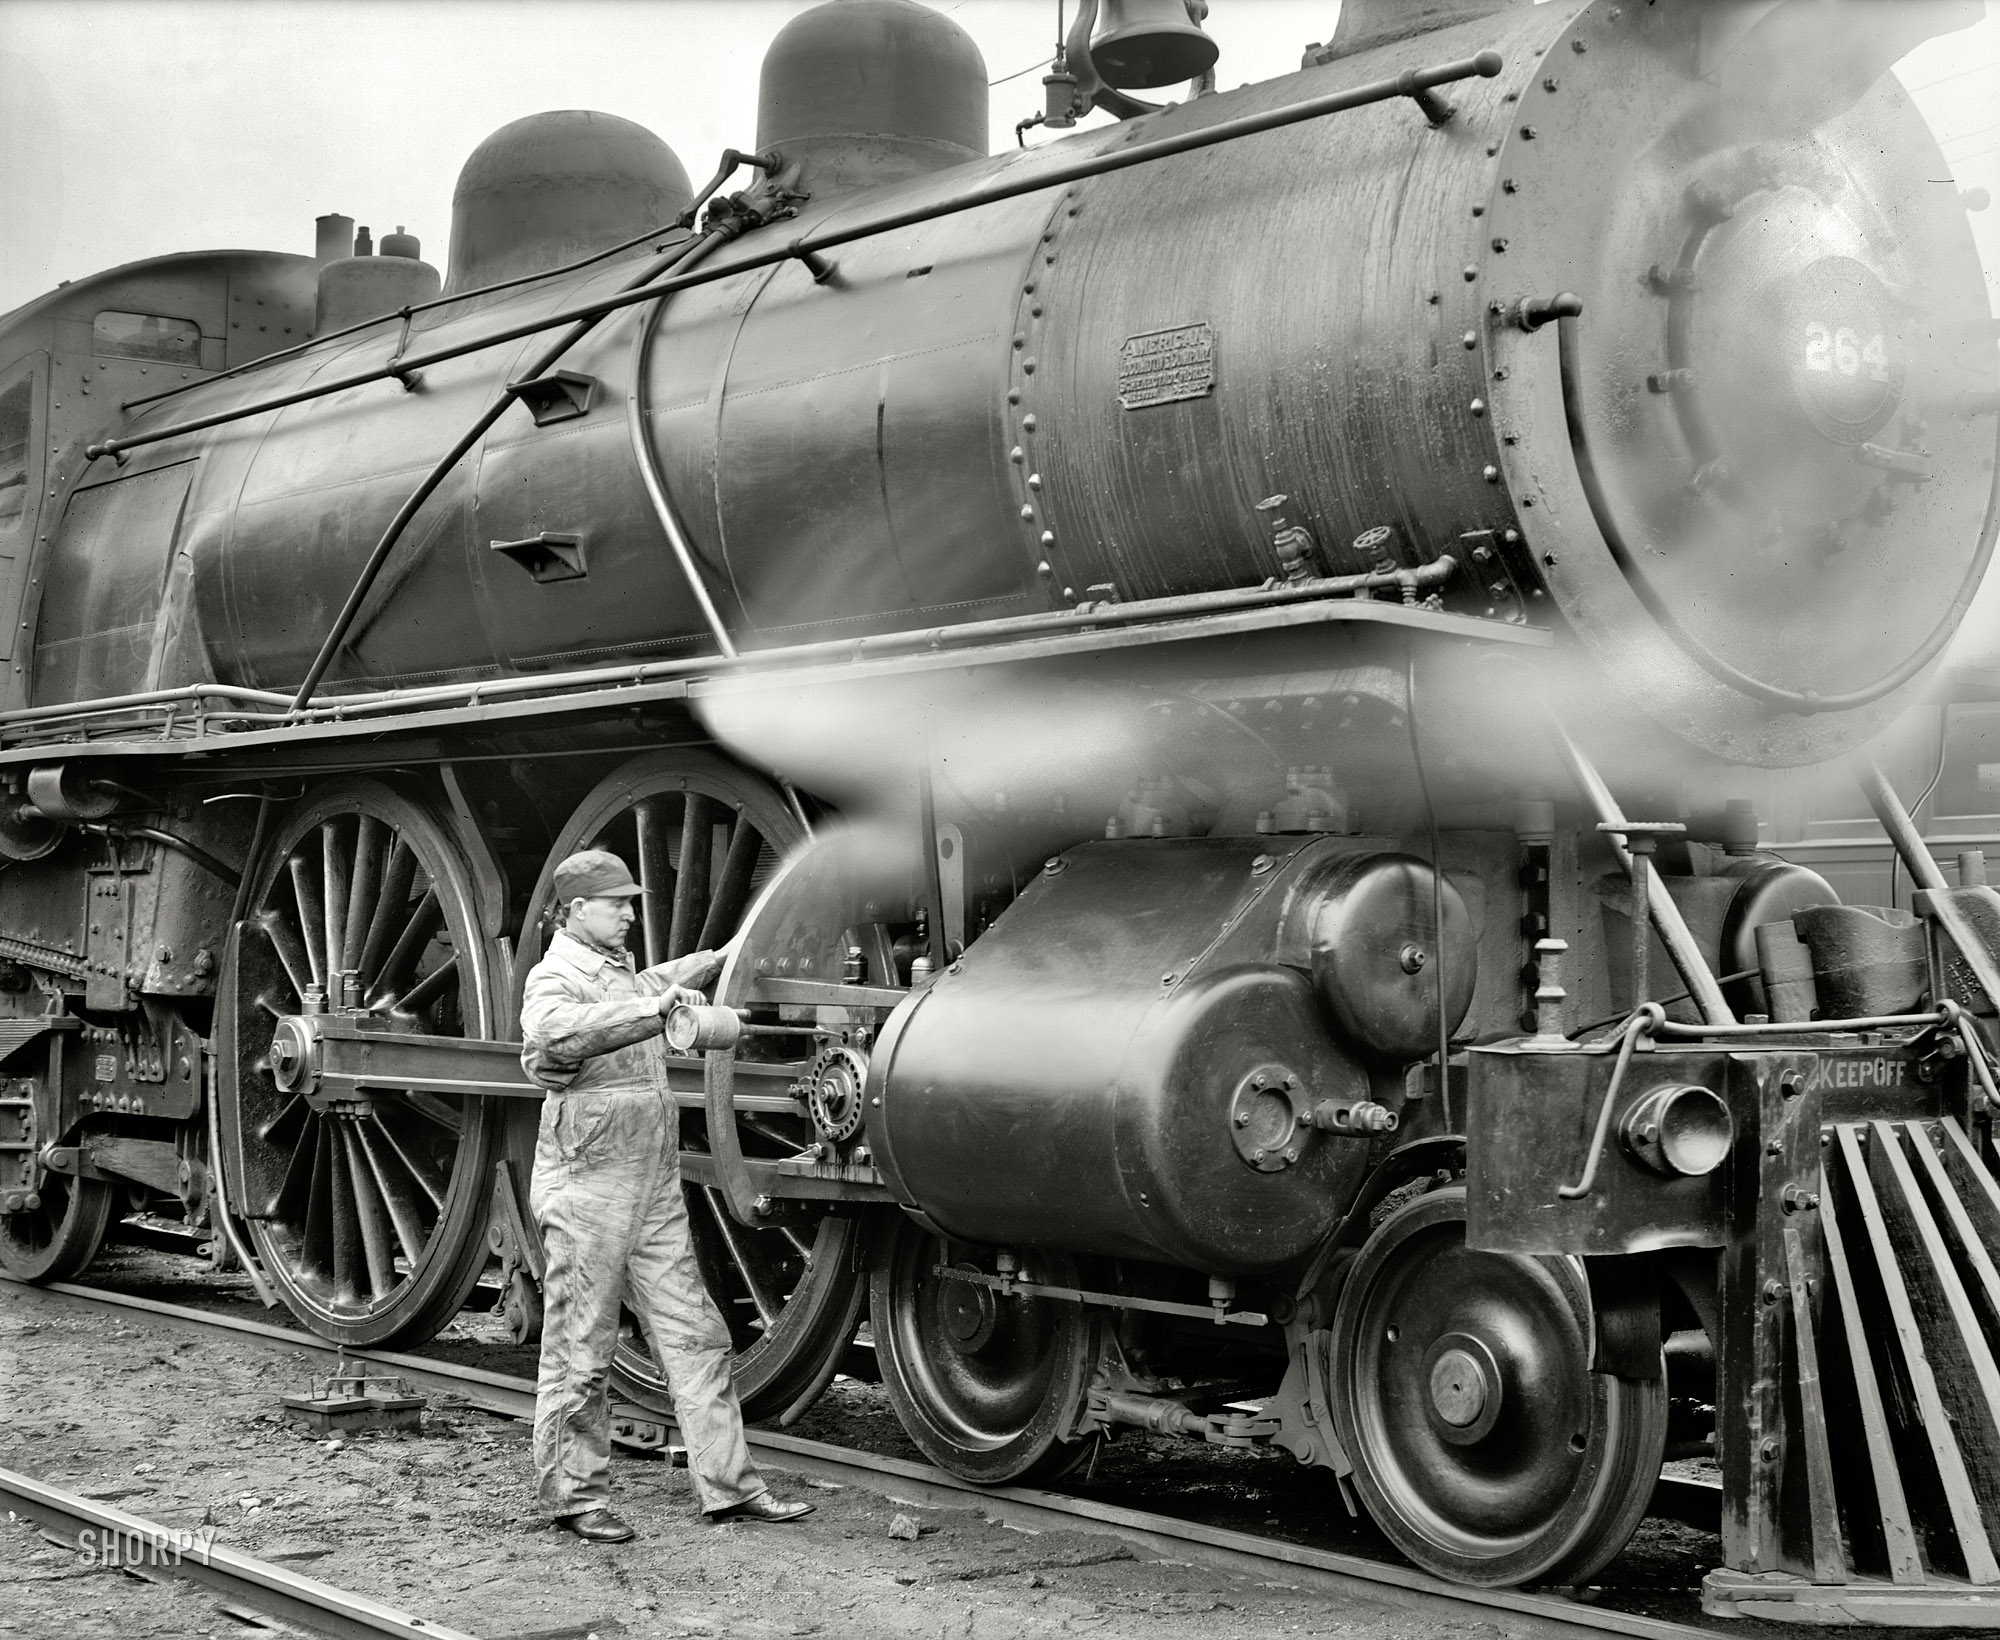 Circa 1904. "Michigan Central Railroad. Oiling up before the start." 8x10 inch dry plate glass negative, Detroit Publishing Company. View full size.